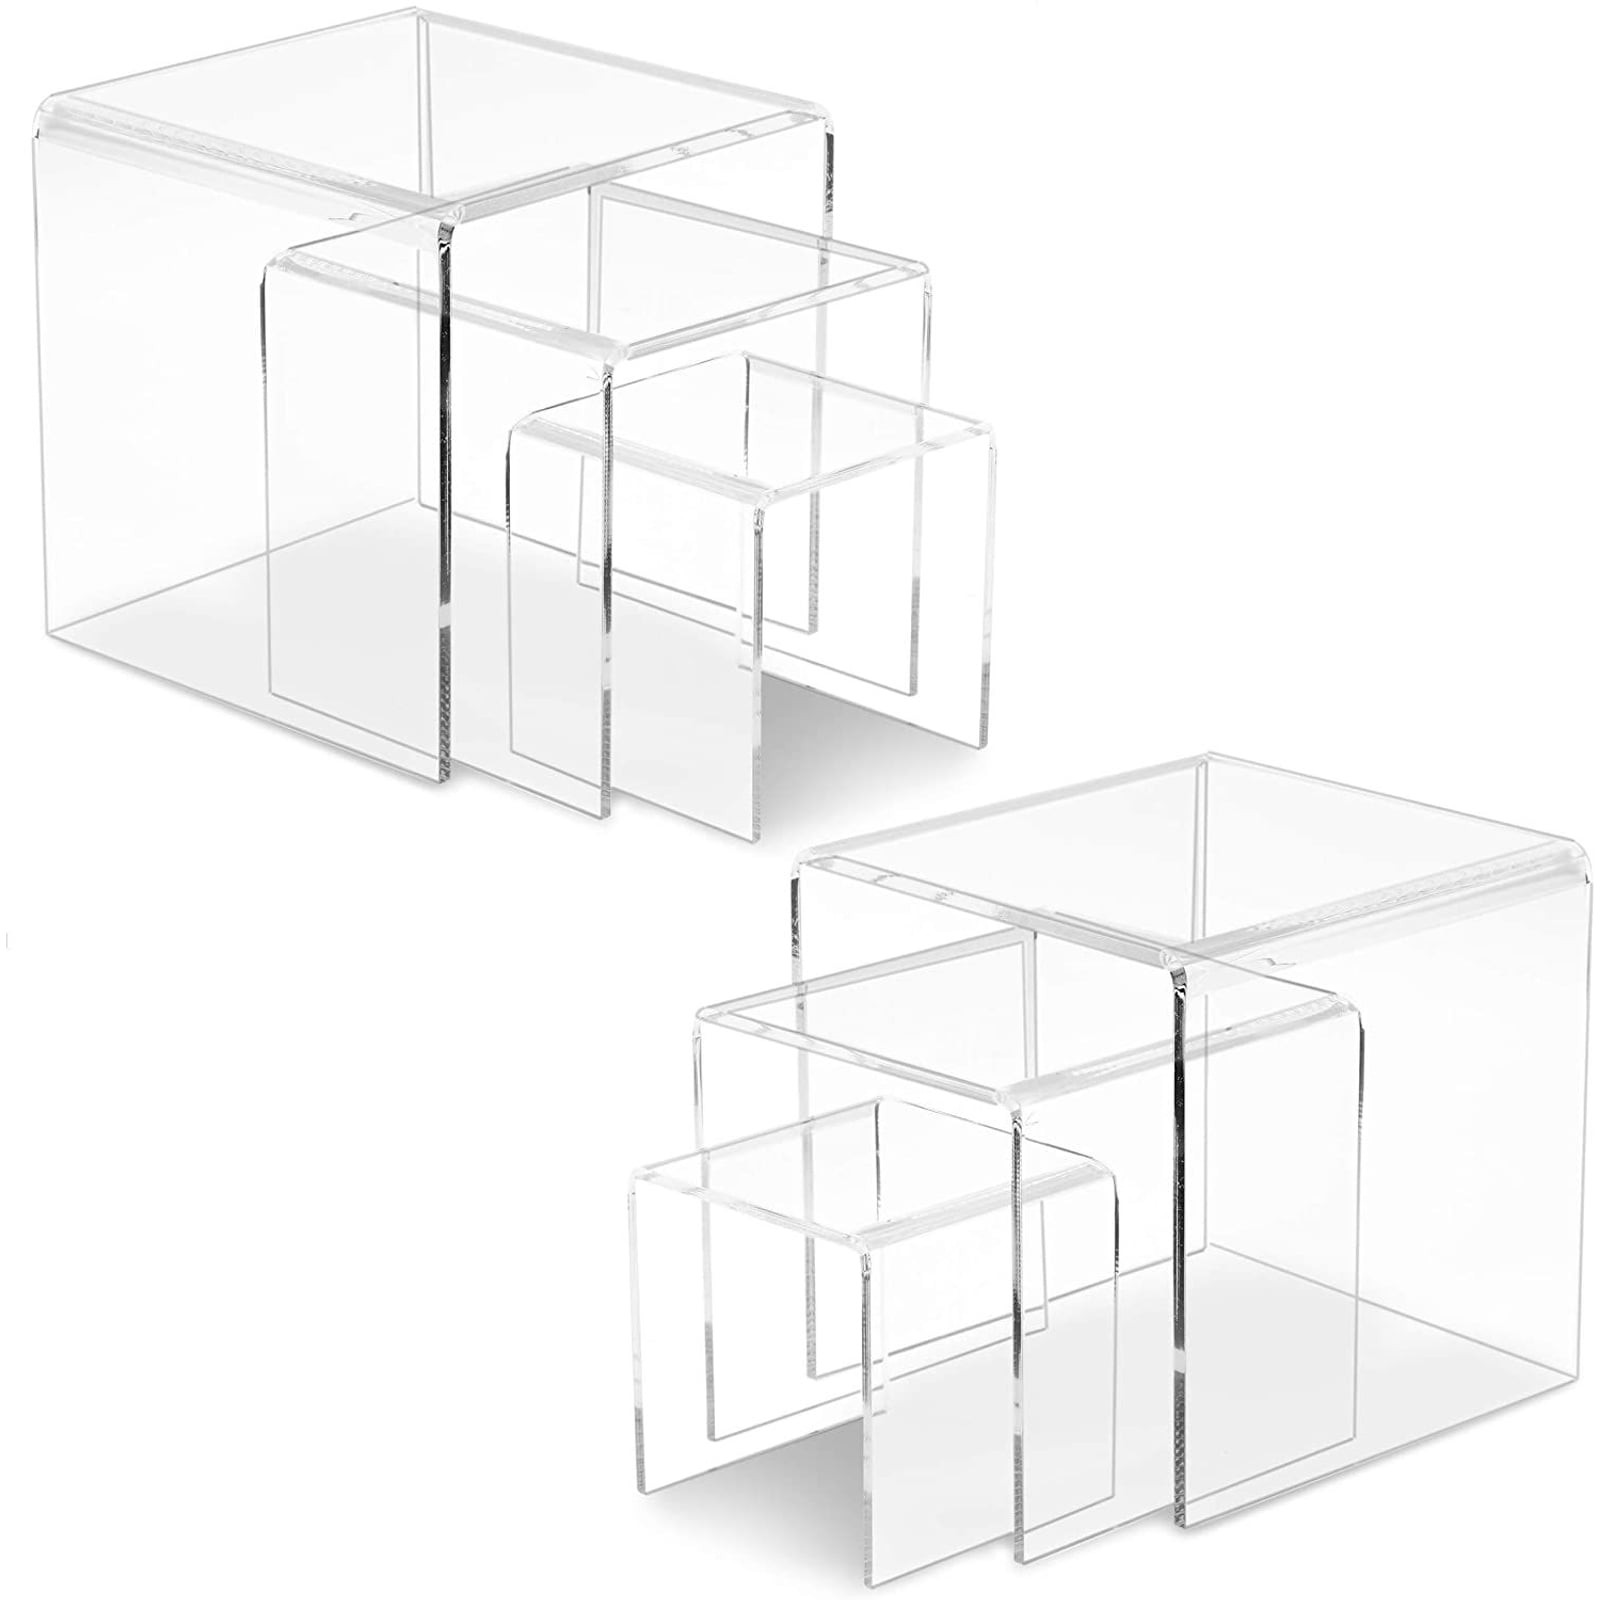 Small set of 3 Clear acrylic display risers 2 3 4 inch square wholesale 